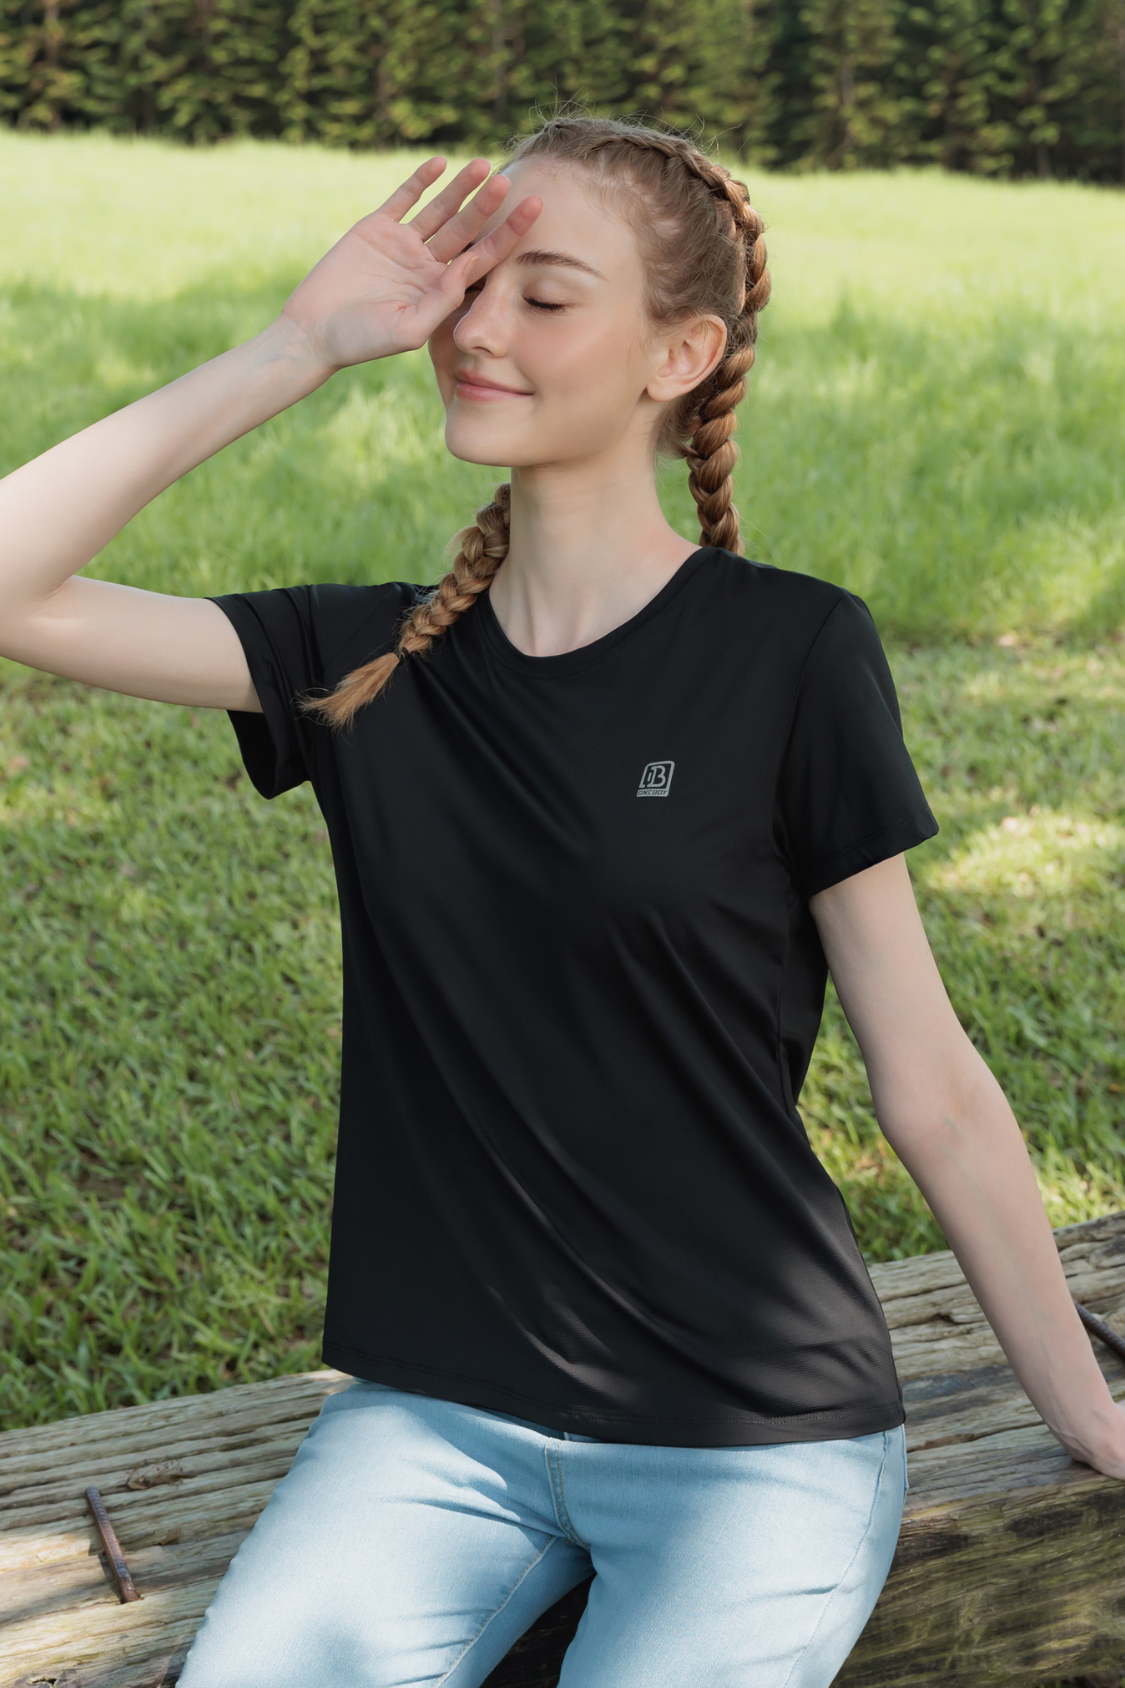 Ice-Tech Breathable Seamless T-Shirt For Women